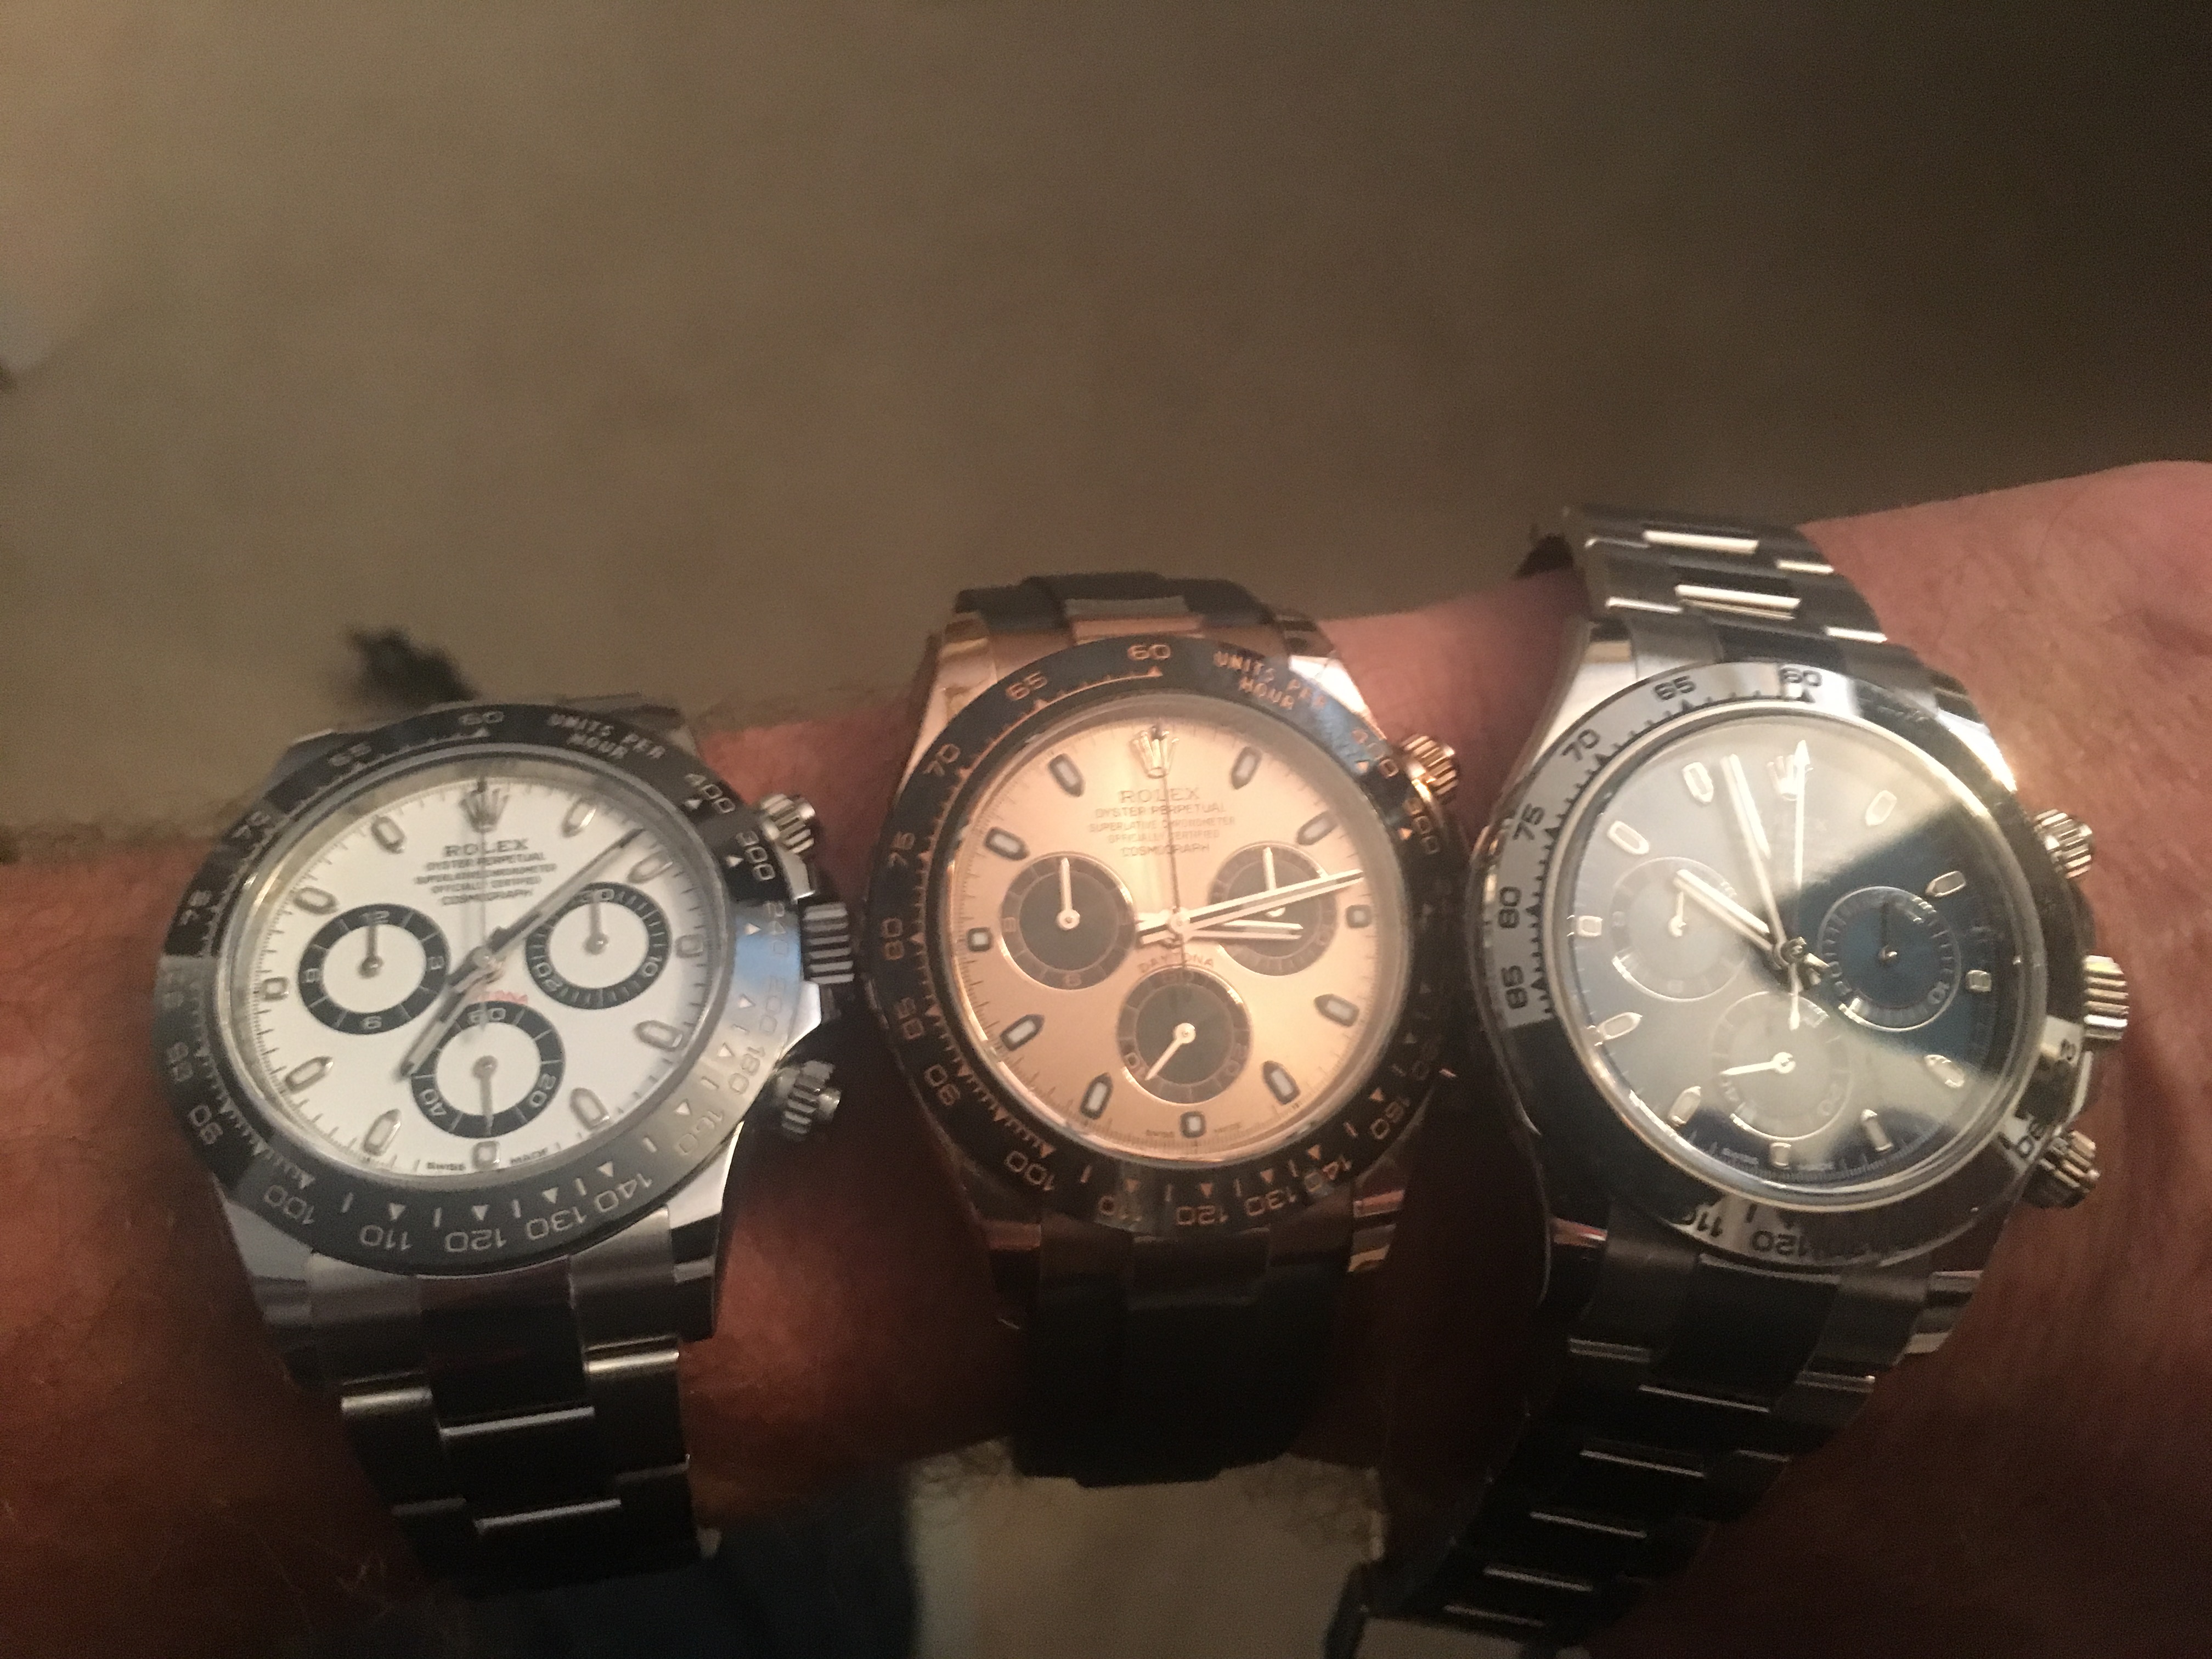 Used Daytona prices. - Page 3 - Watches - PistonHeads